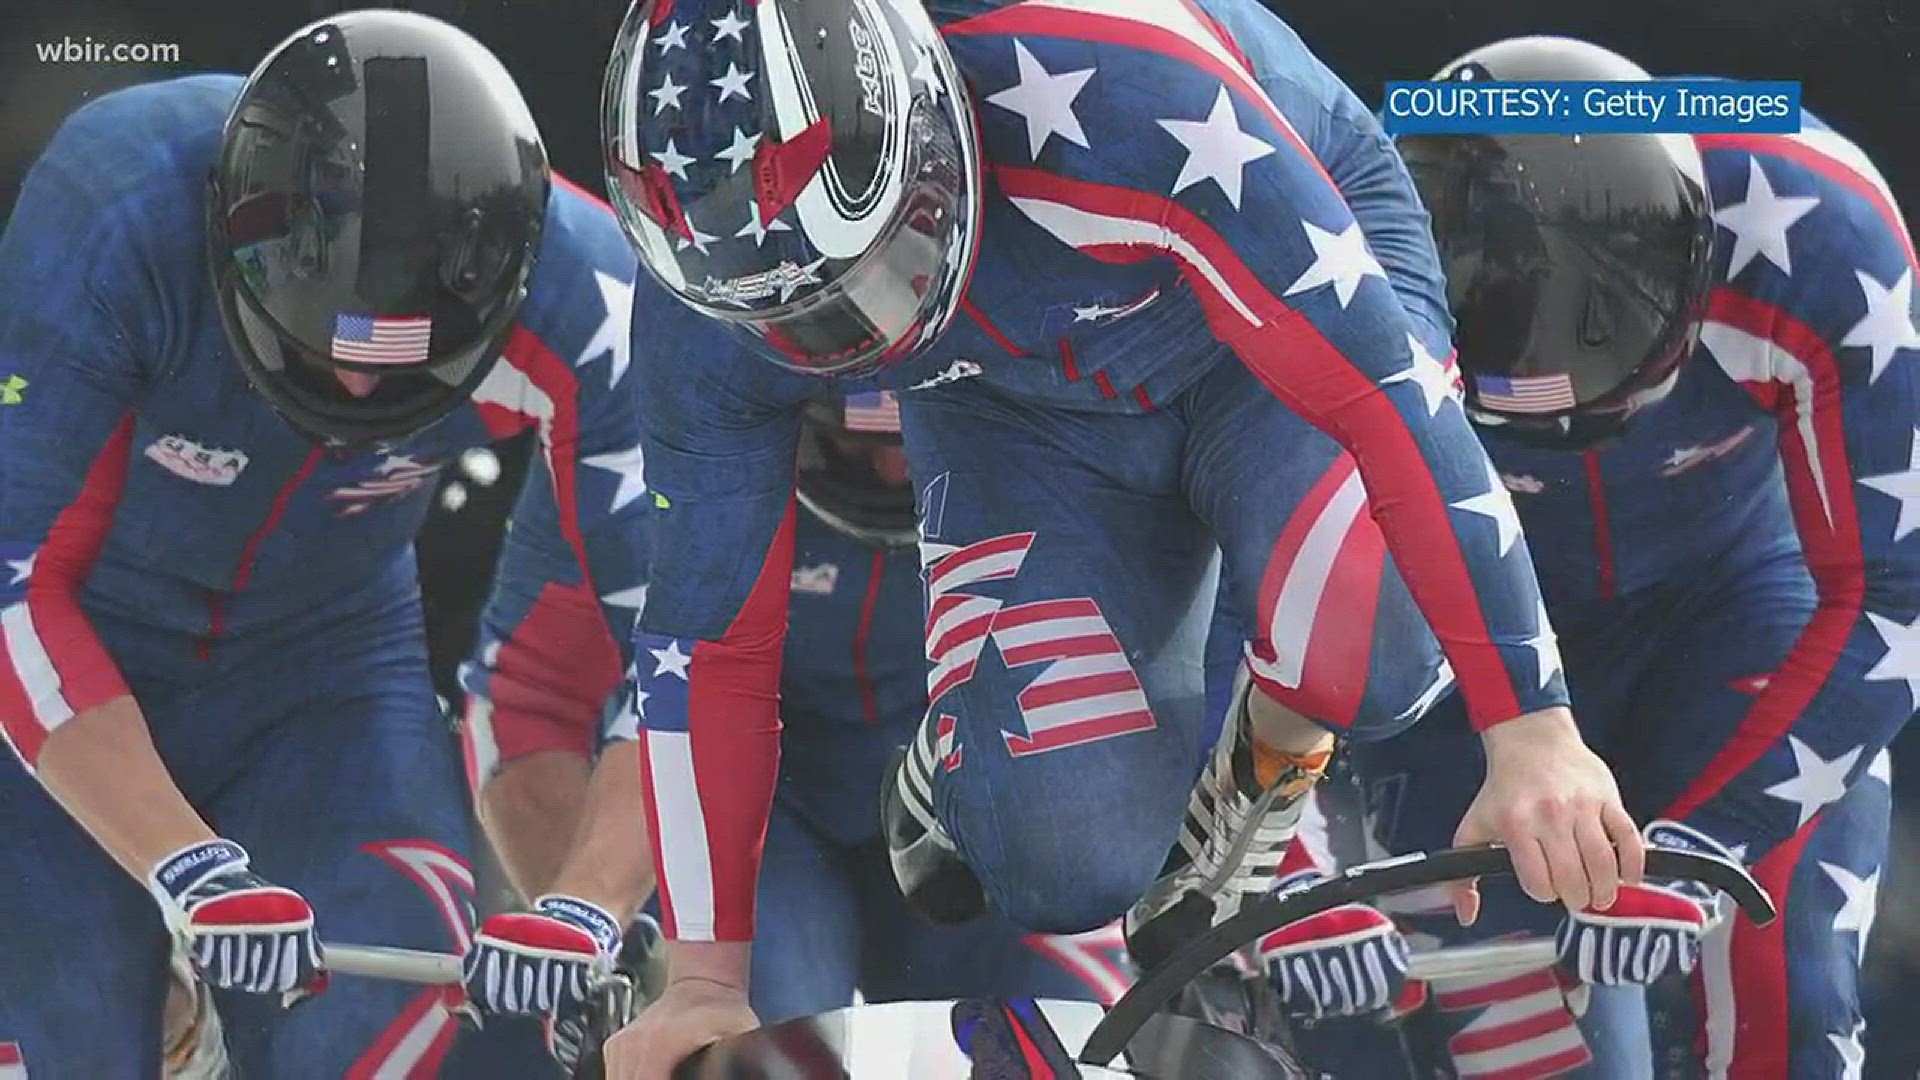 Steve Holcomb's former trainer remembers the late bobsledder during the 2018 Winter Olympics.